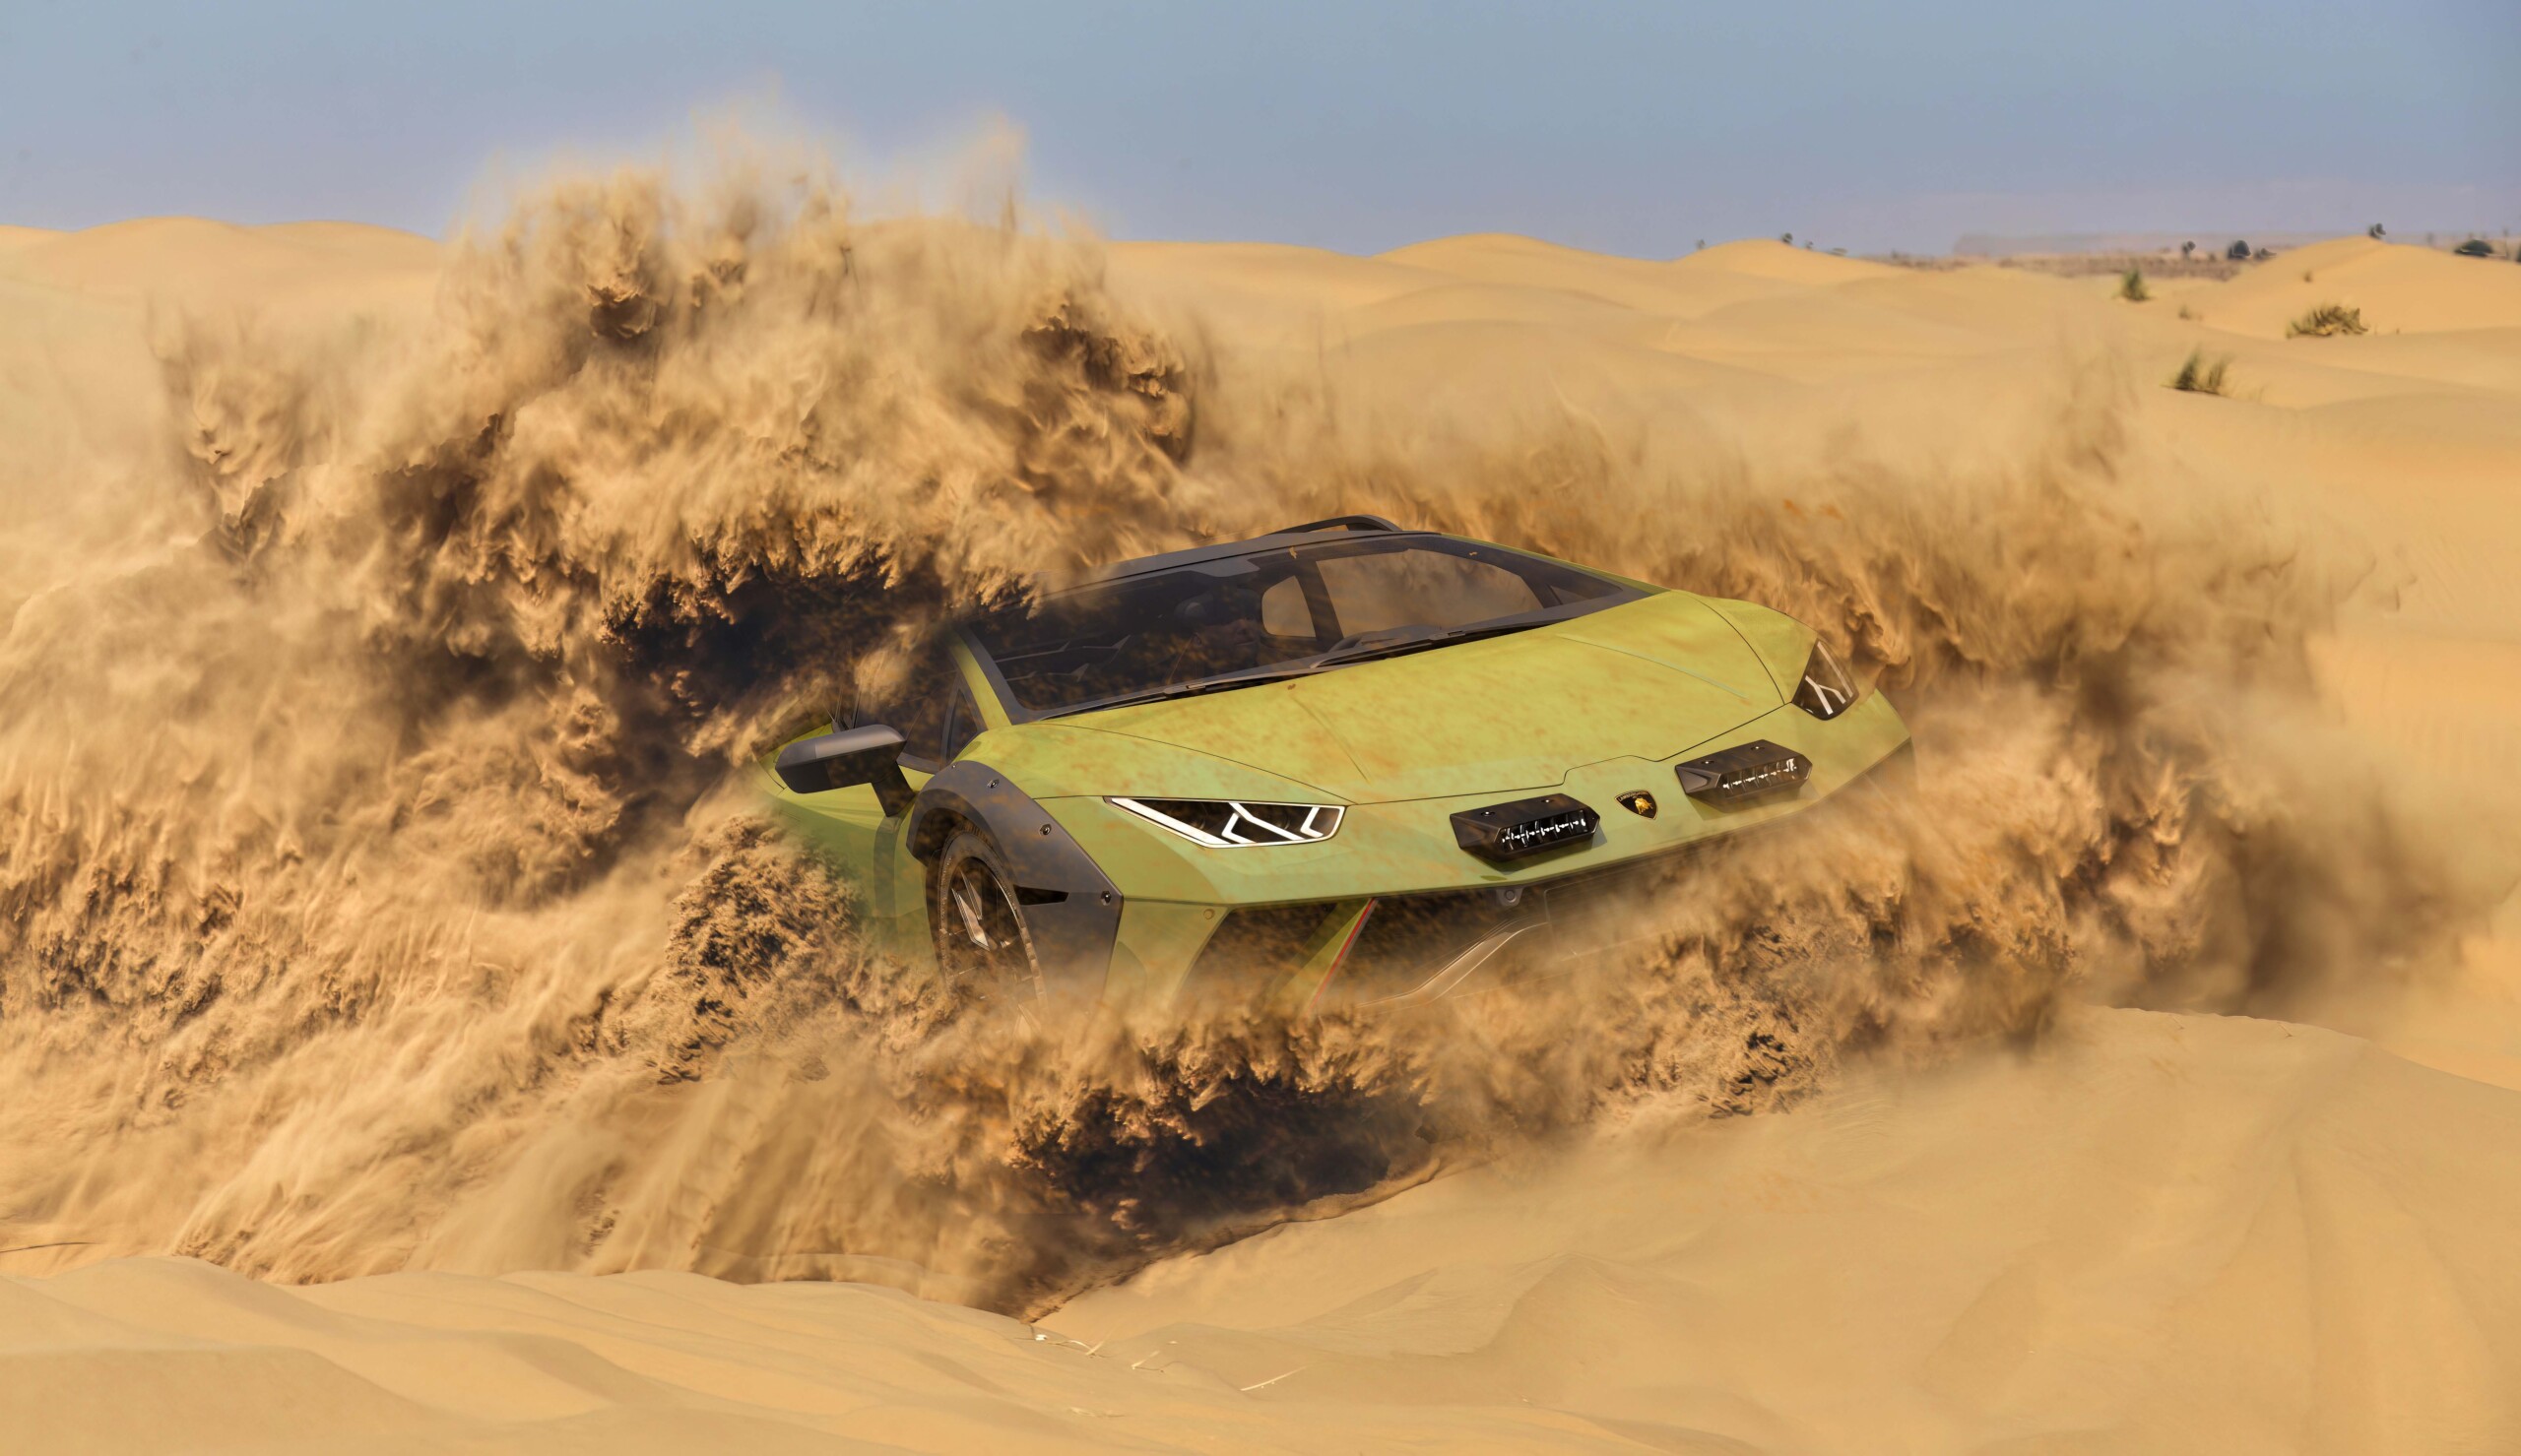 An off-road style Lamborghini driving in a desert, creating a large cloud of dust.